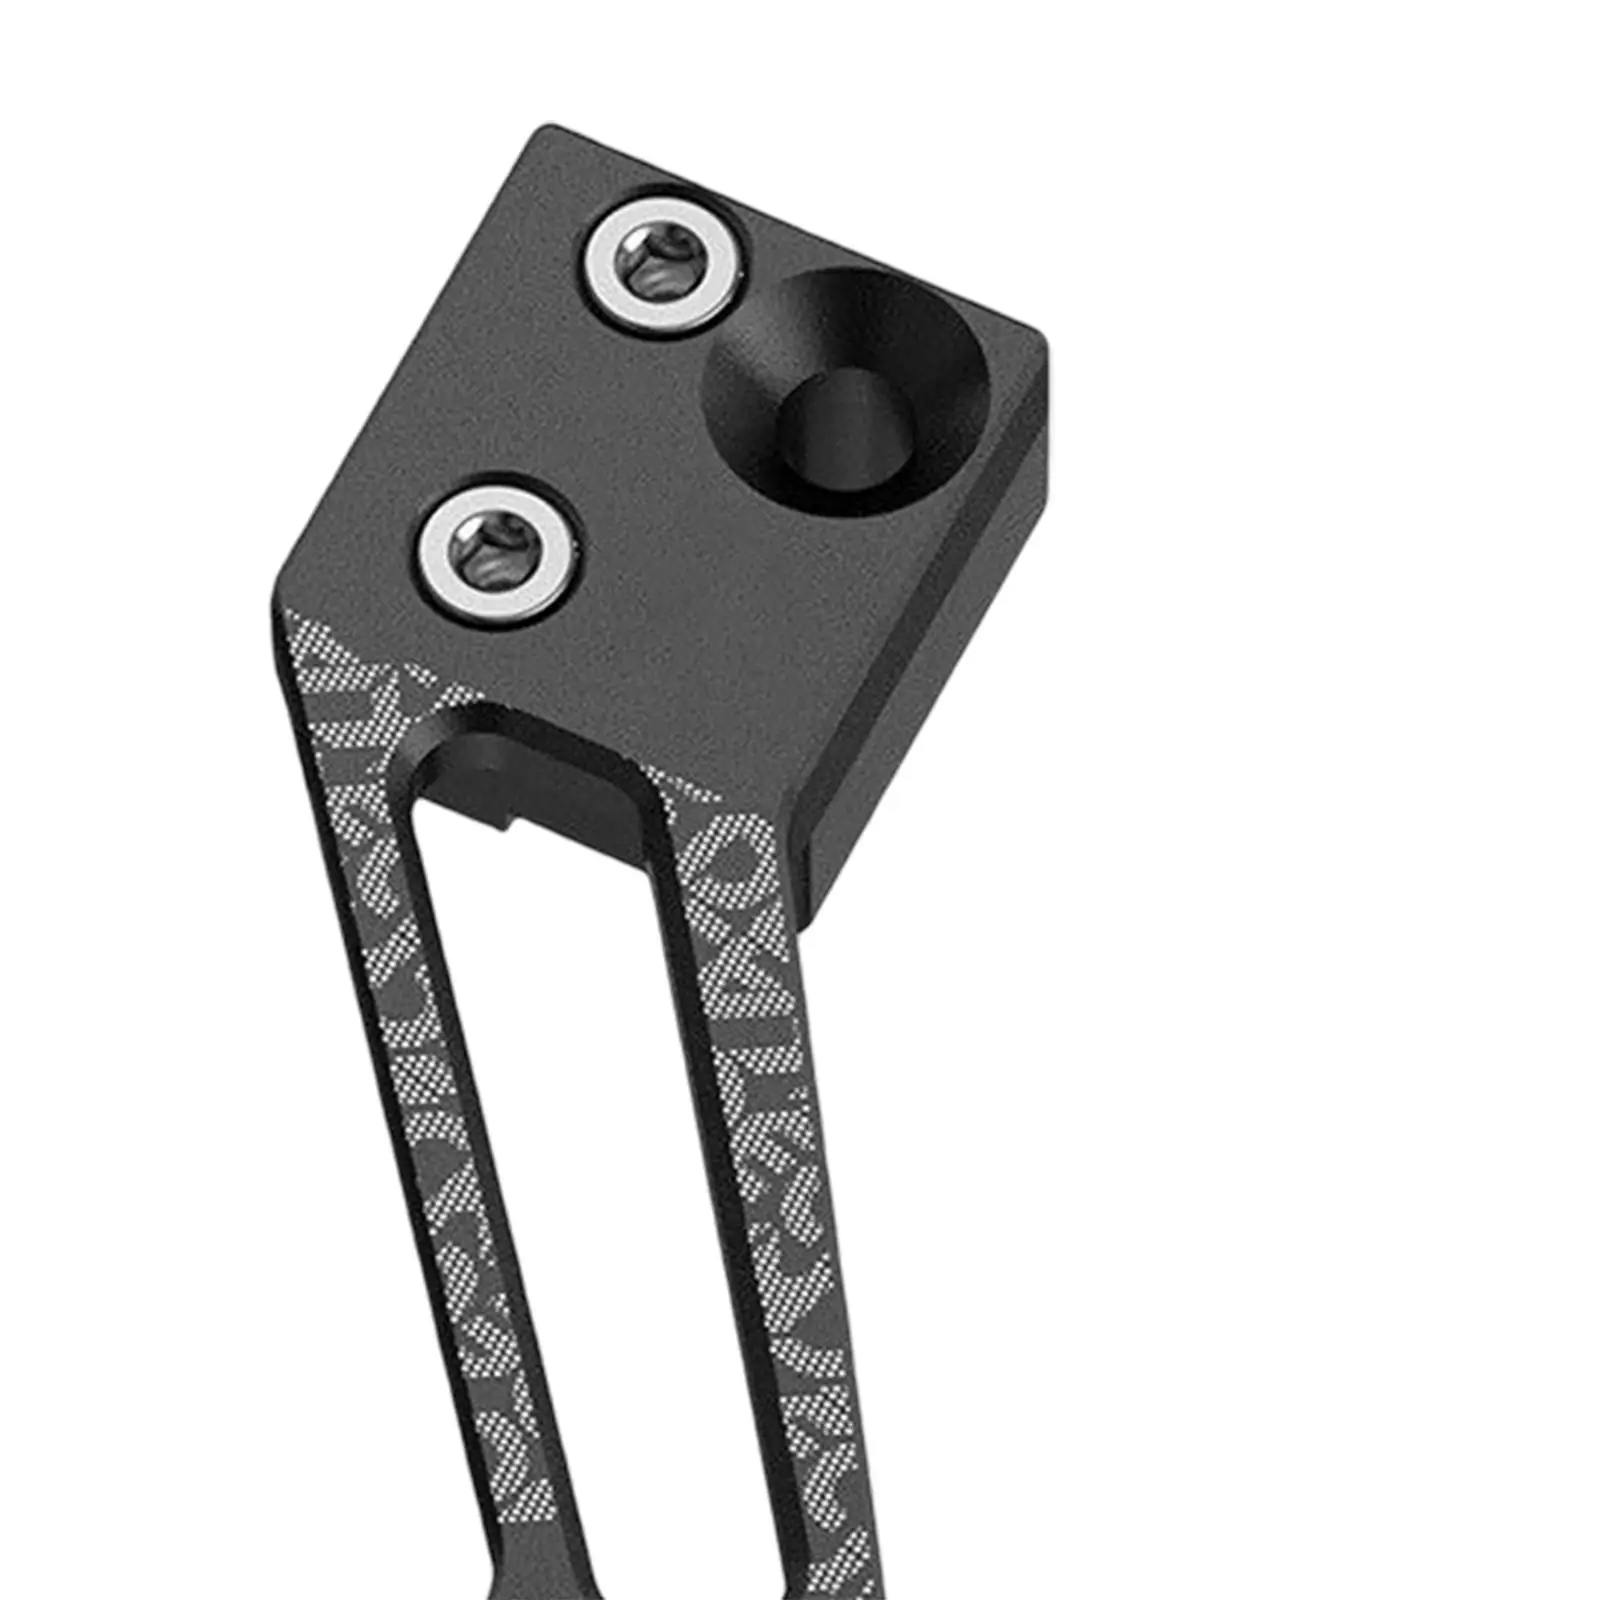 Aluminum Alloy Chain Guide D Type Chain Holder Protector Accessories for MTB